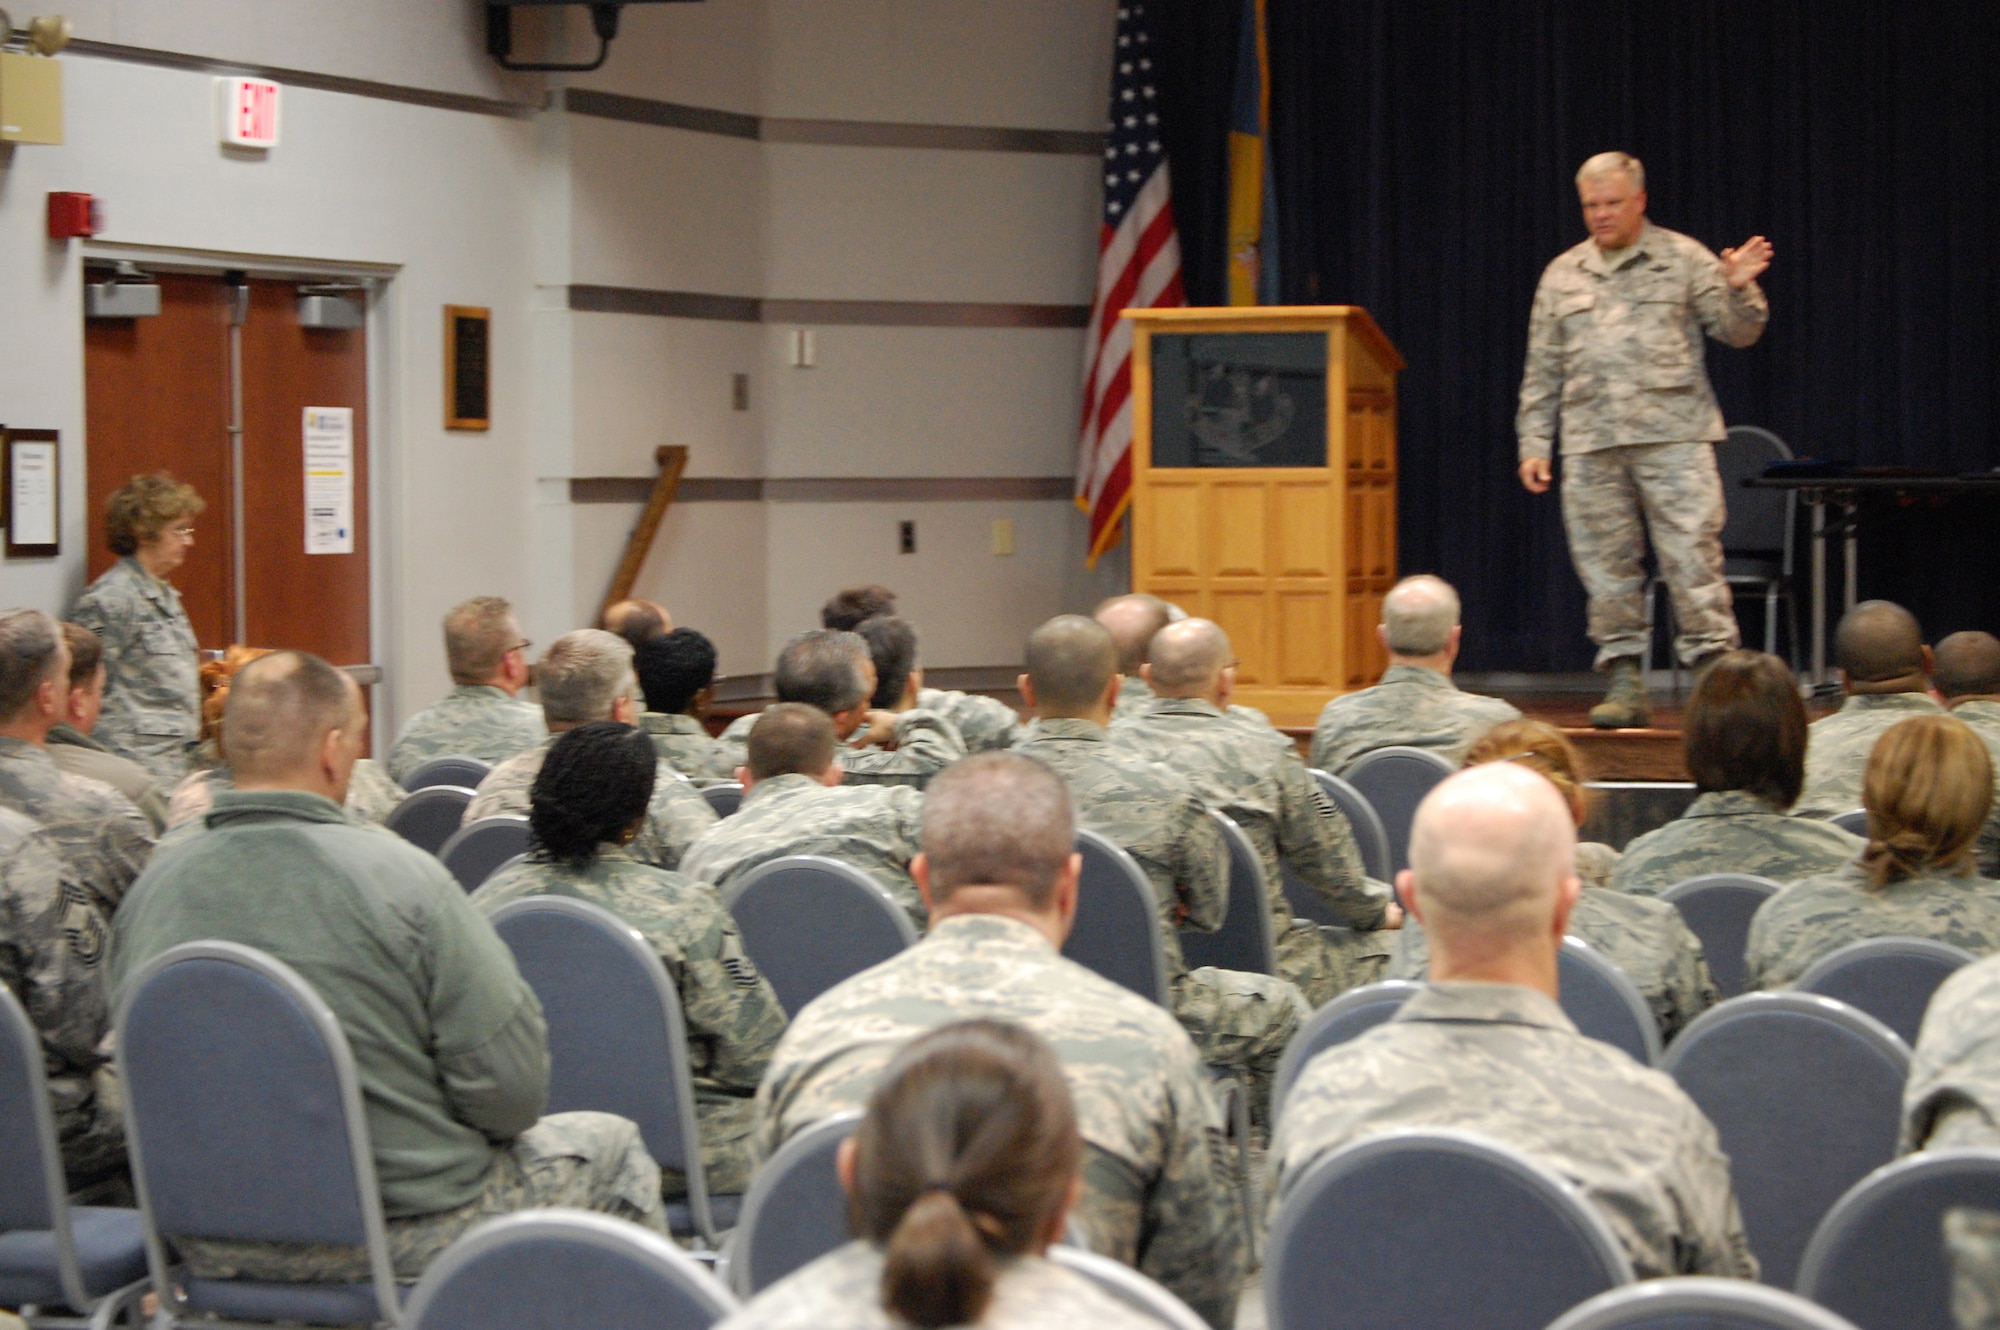 Brigadier Gen. Bruce Thompson, Director of Joint Staff, Joint Force Headquarters, Delaware National Guard, on Feb. 4, 2012 at one of three Airman's Calls held for the 1,000-person Del. Air Guard force on what is known and unknown about proposed Air Force budget cutbacks and aircraft changes. (U.S. Air Force photo/Tech. Sgt. Benjamin Matwey)